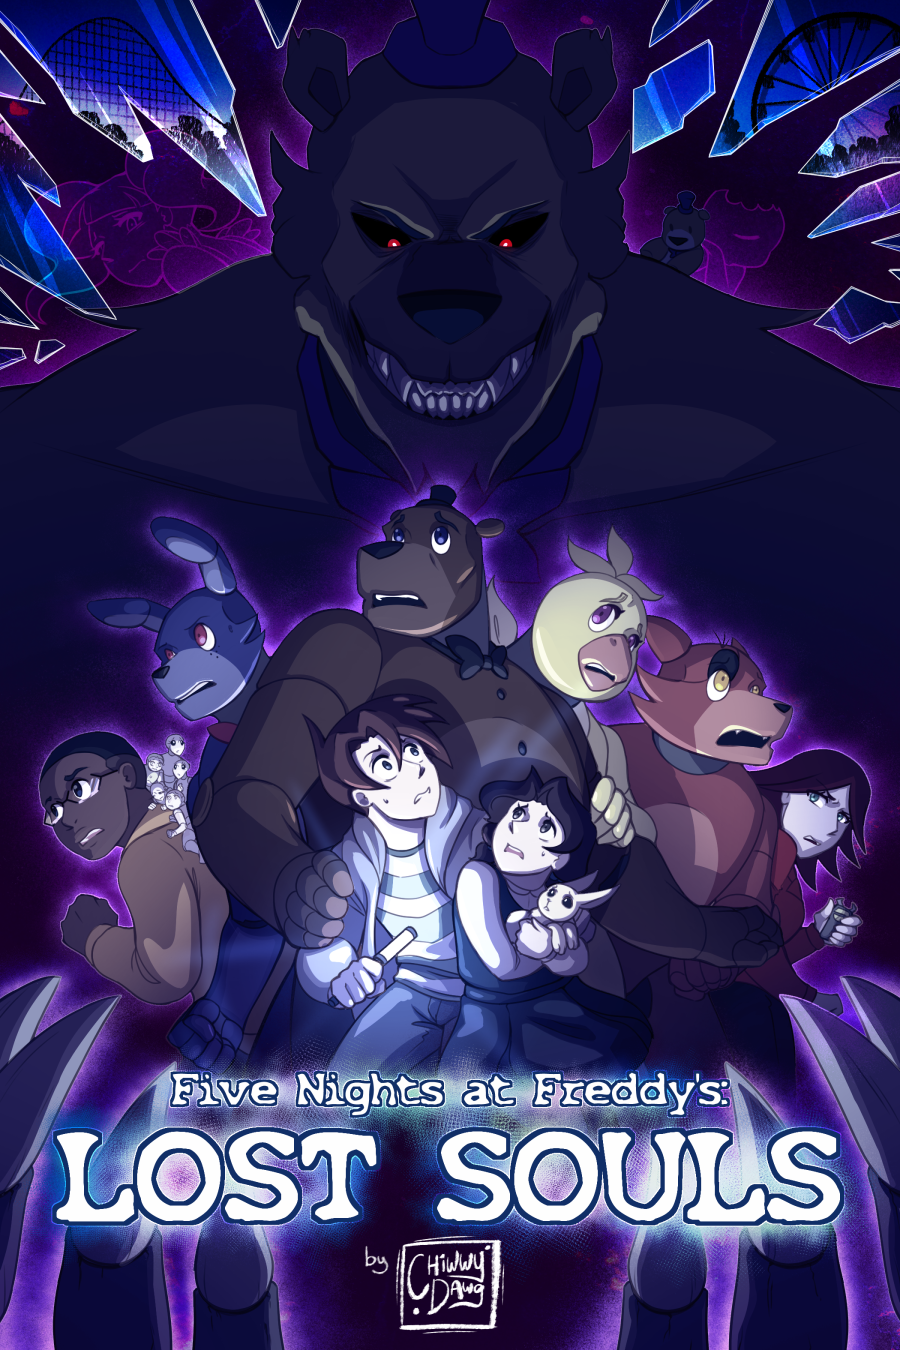 Five Nights at Freddy's: Lost Souls MAIN COVER by ChiwwyDawg on DeviantArt